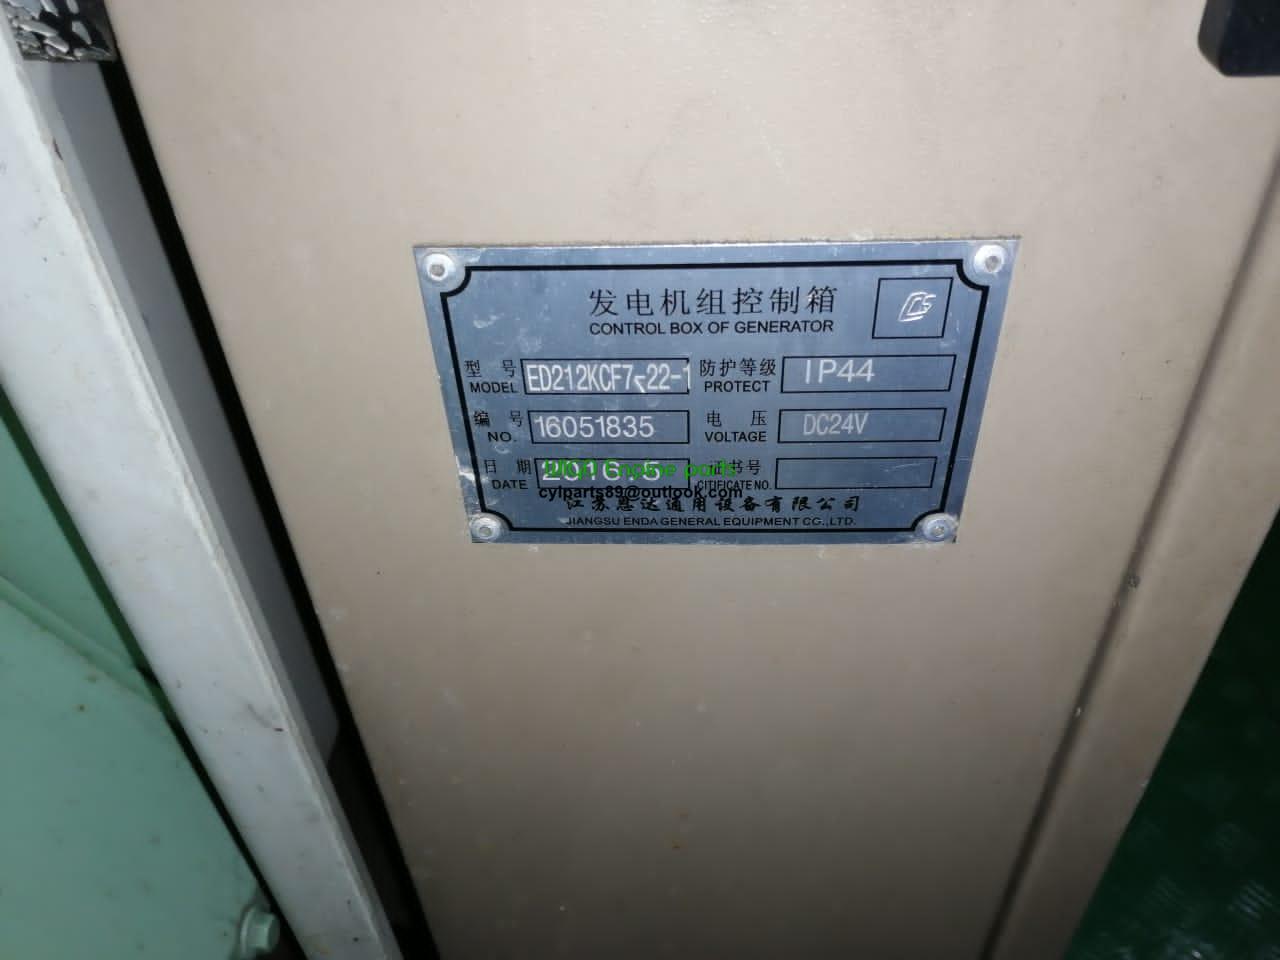 Where the Generator control box Name plate located